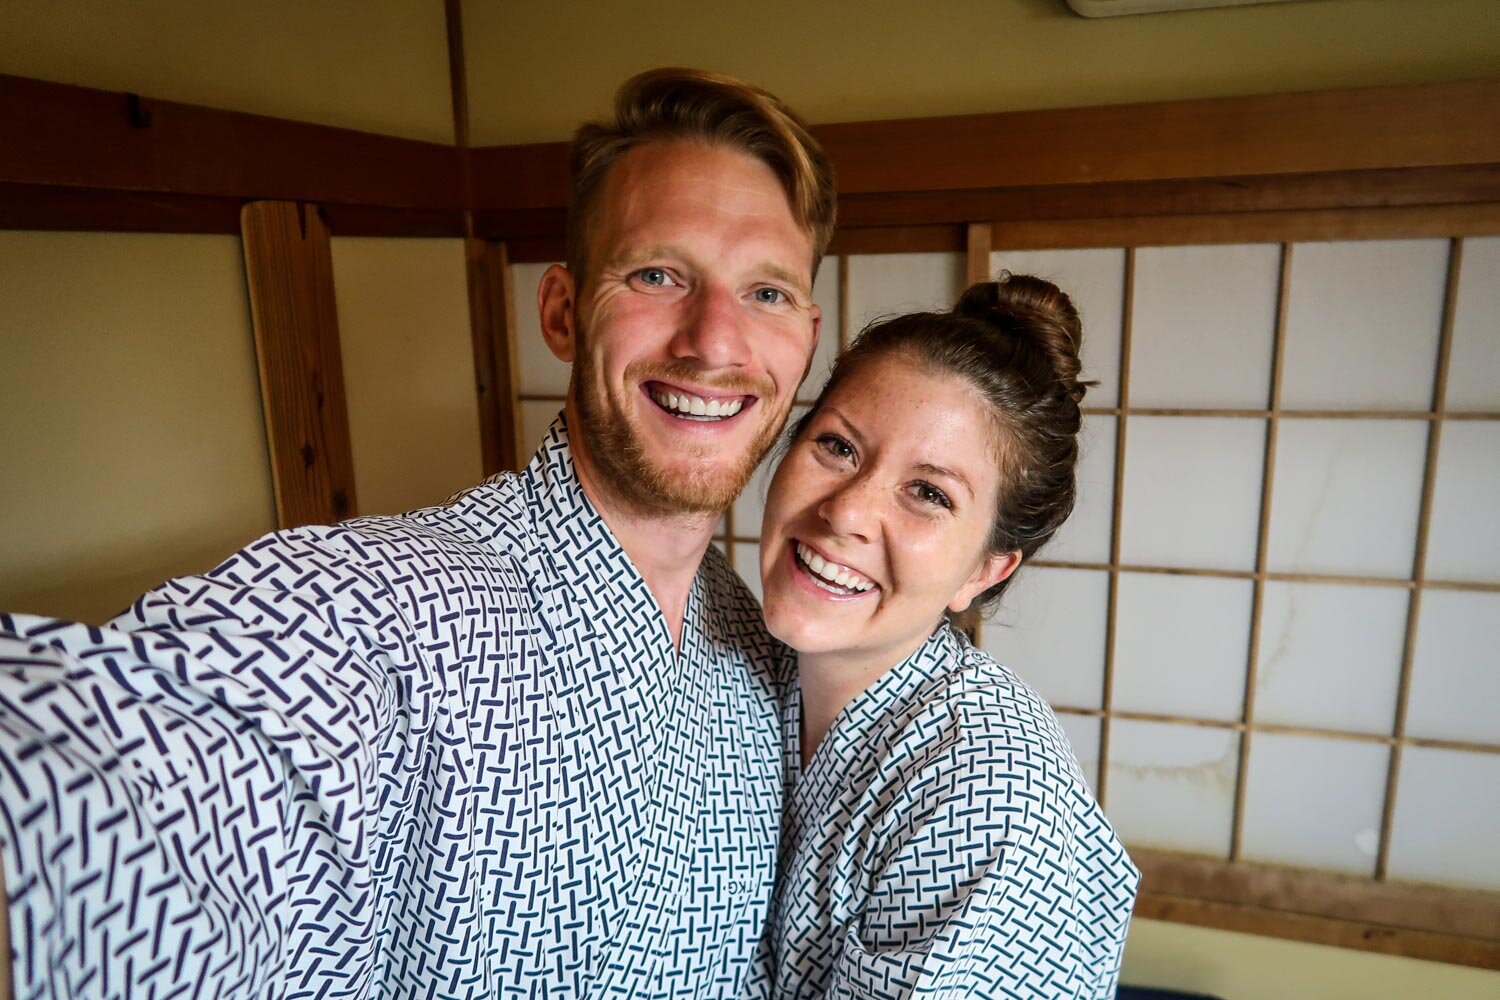 Us wearing Yakata that was provided by our guesthouse.